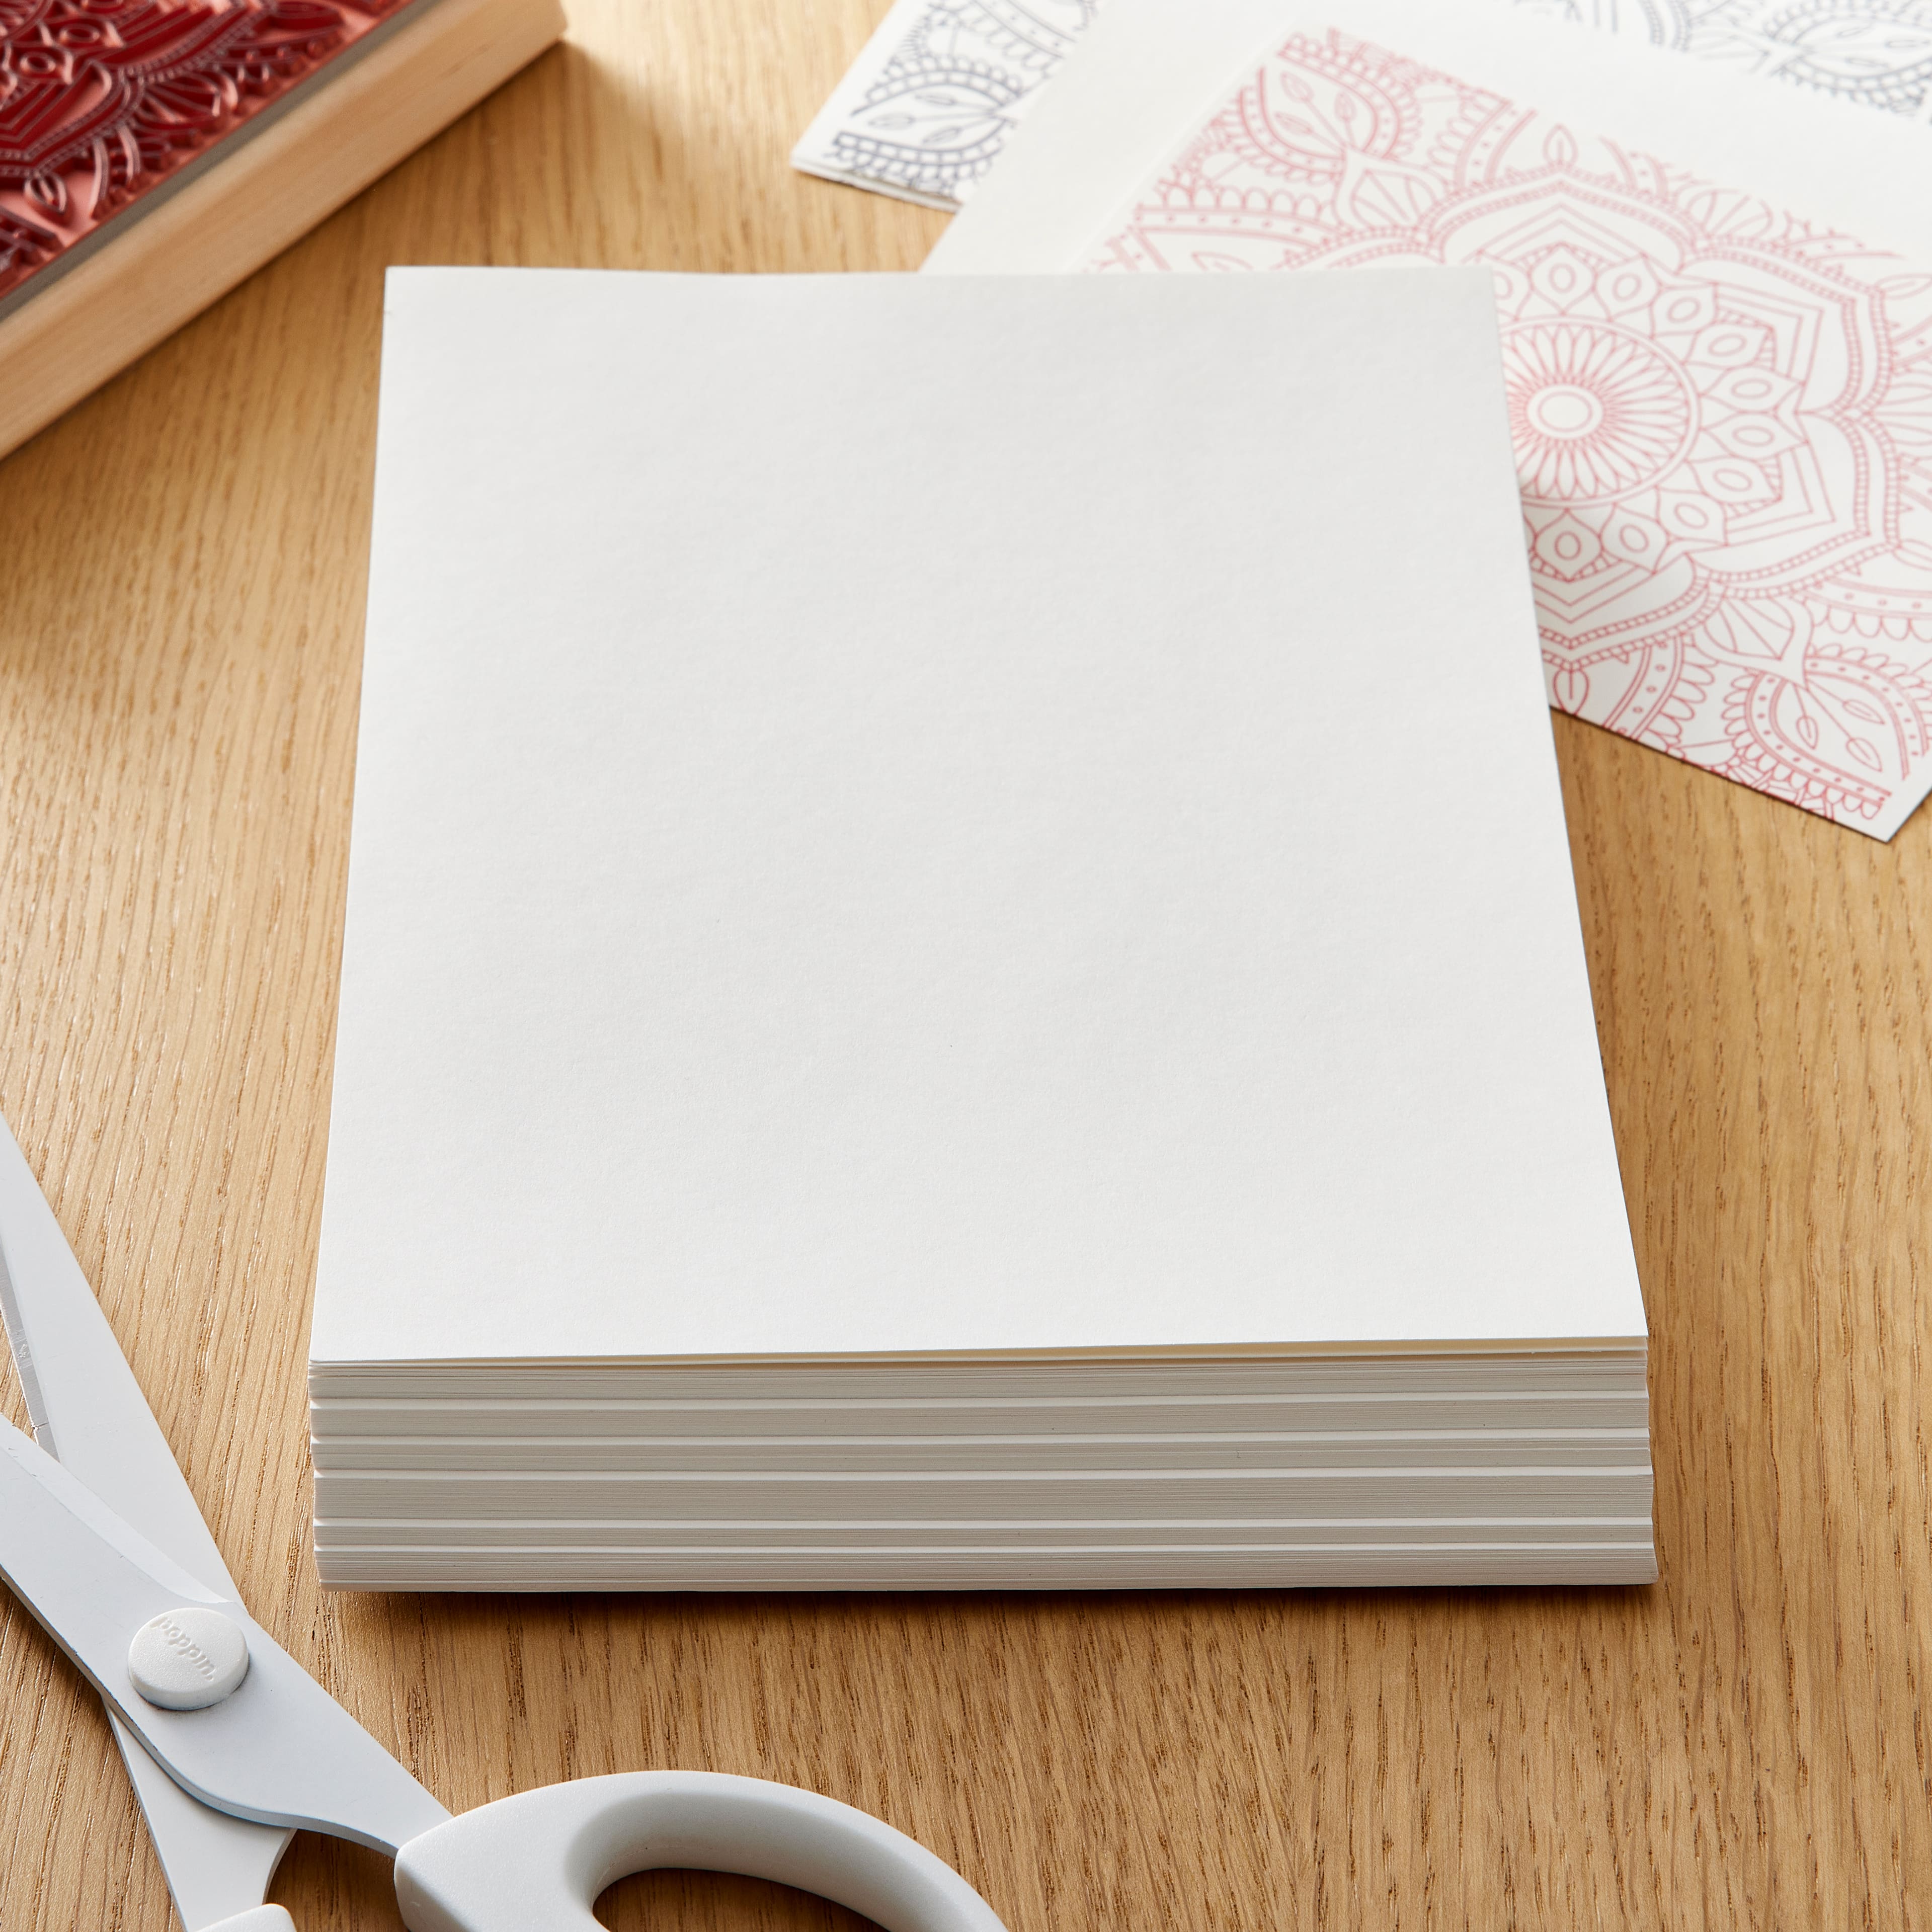 RECOLLECTIONS CARDSTOCK Paper 8 1/2 x 11 50 Sheets 65 lb SOLID WHITE DOVE